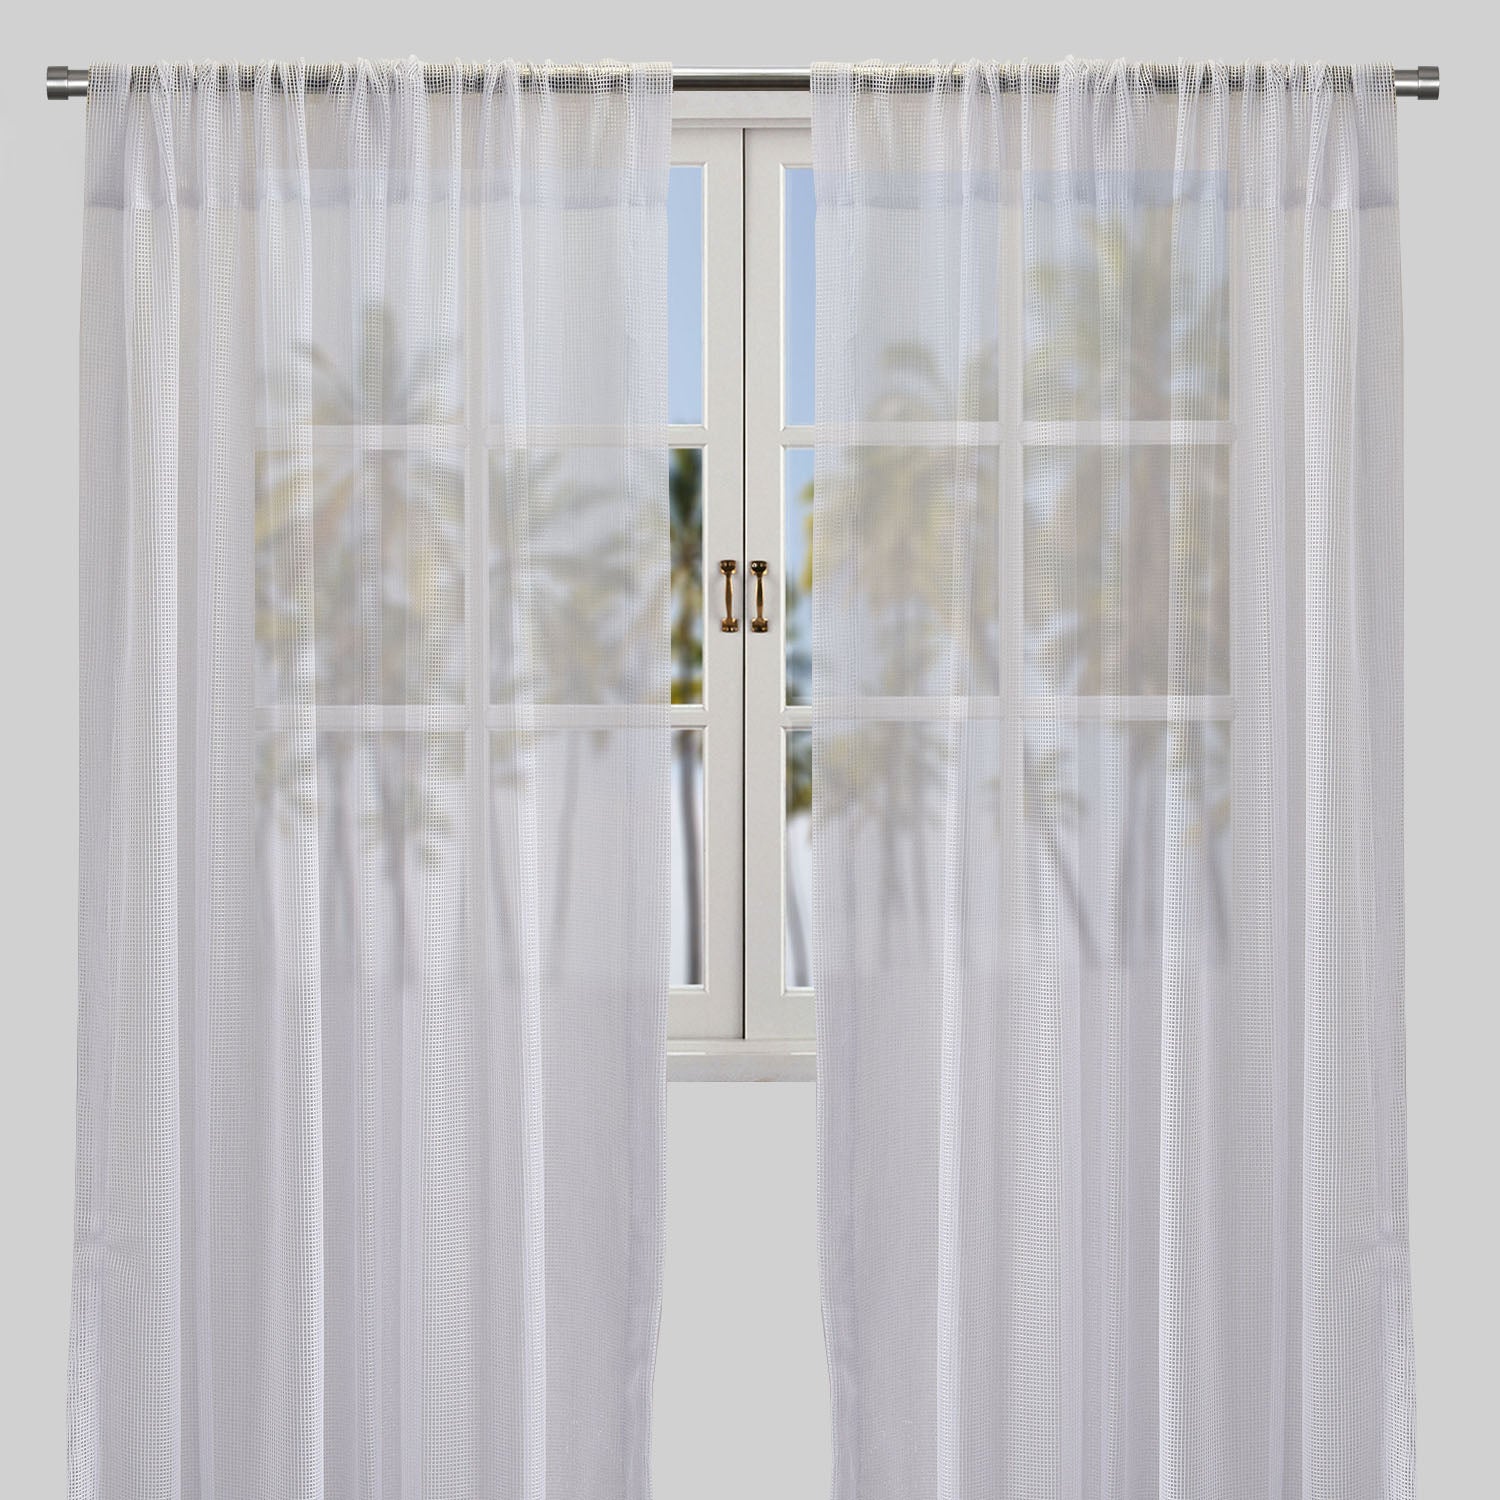 Zone Curtain Panels | Solid Net-Like Sheer